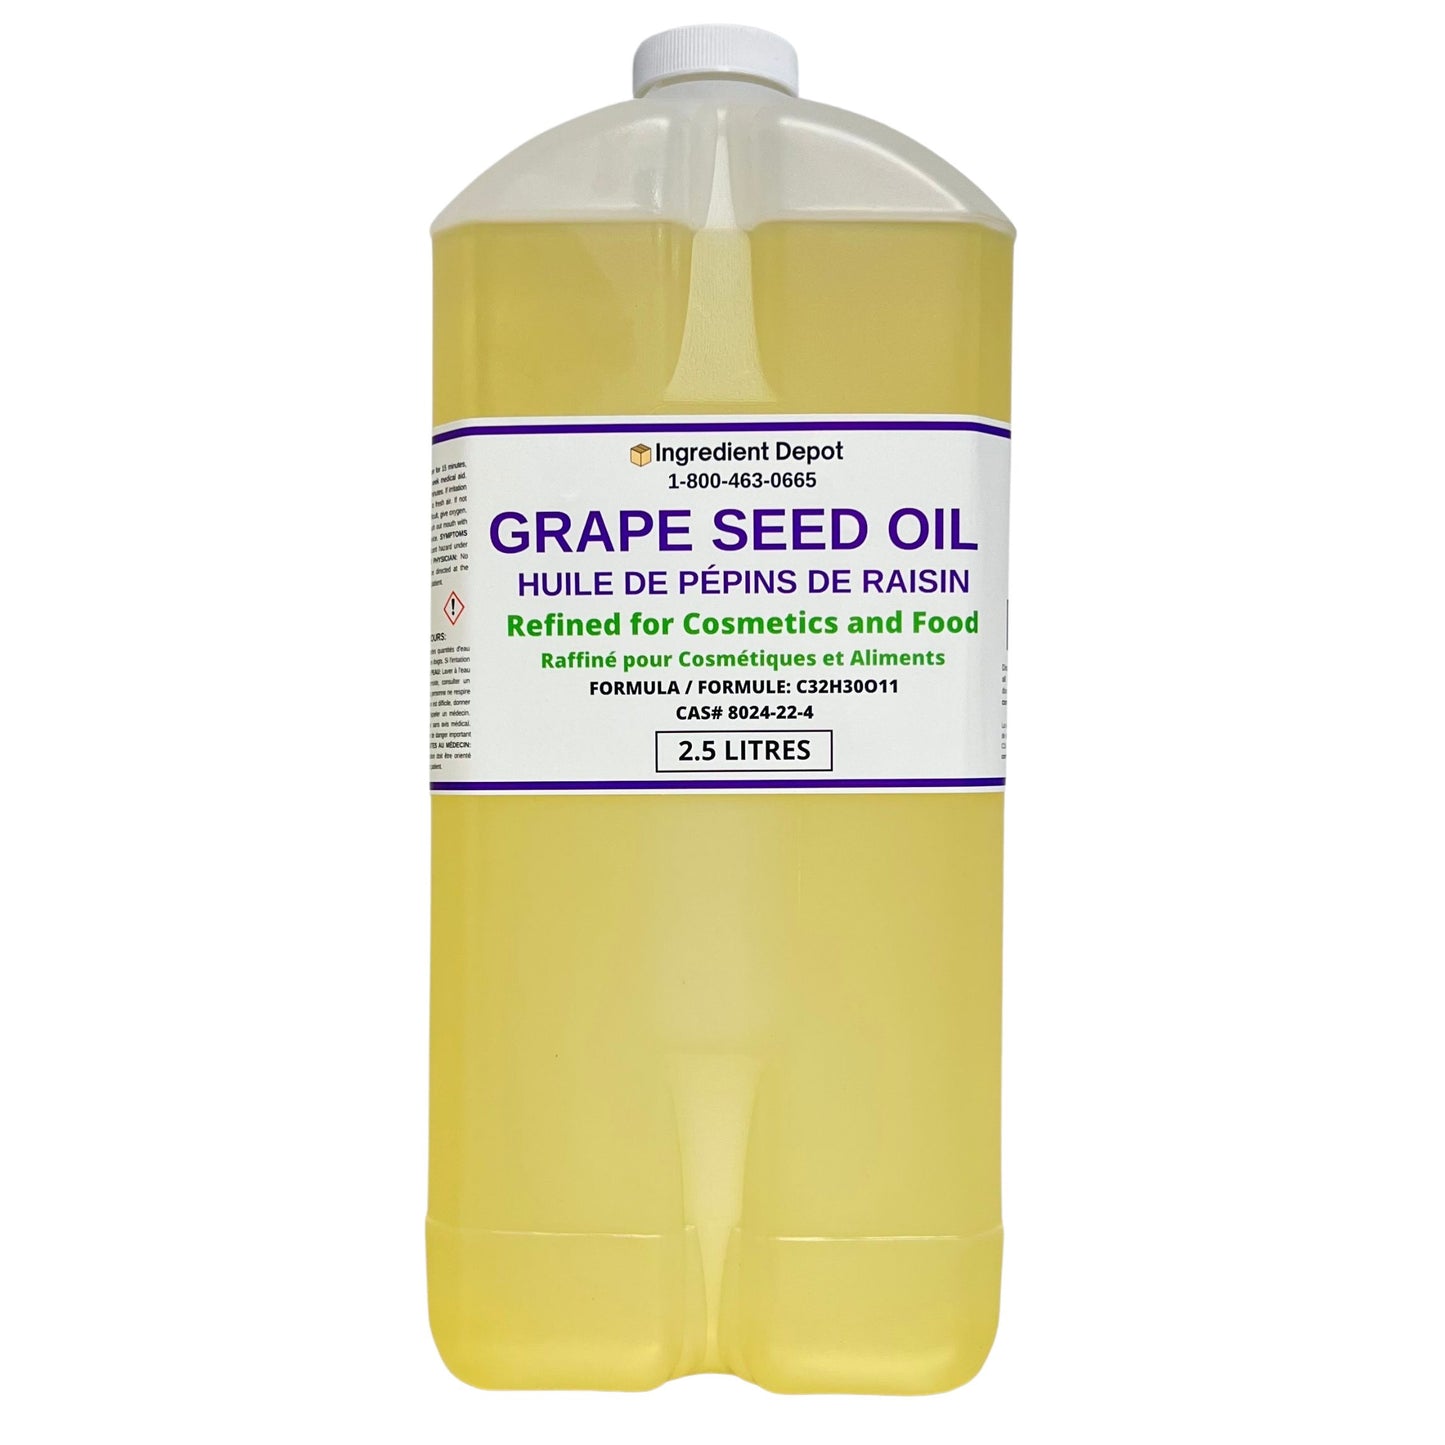 Grape Seed Oil (Refined) 2.5 litres - IngredientDepot.com